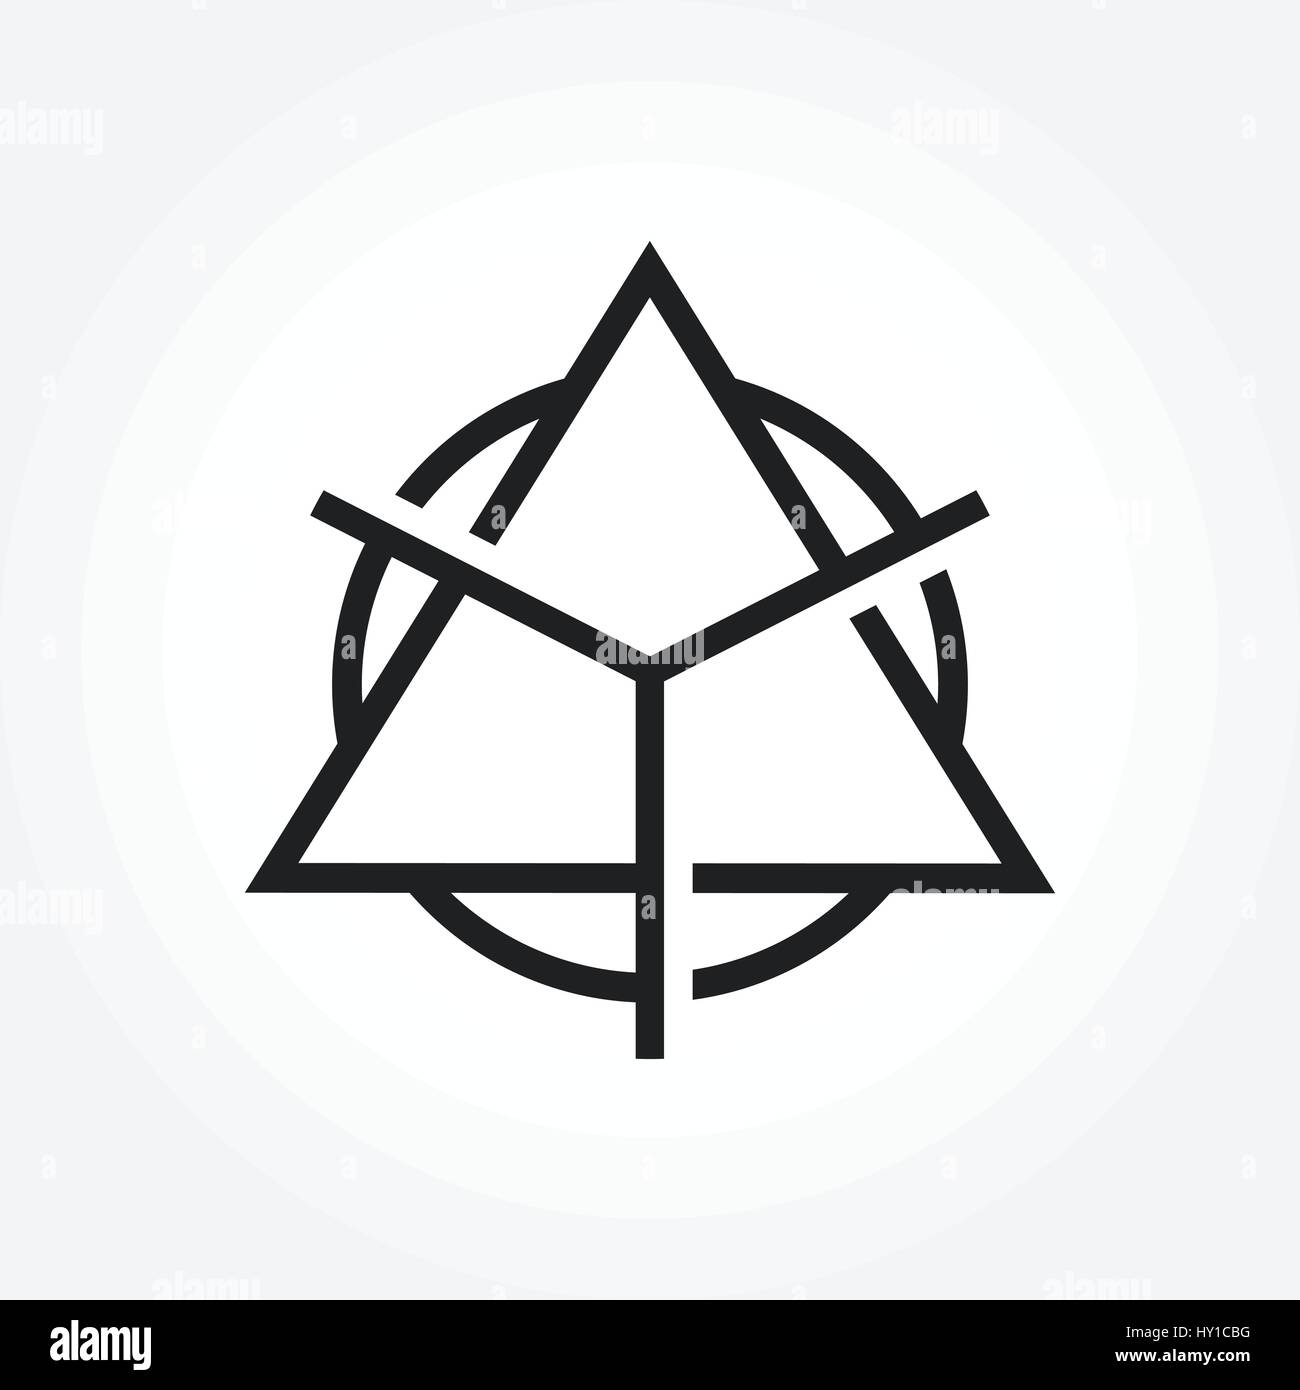 Abstract Triangle Symbol, vector illustration Stock Vector